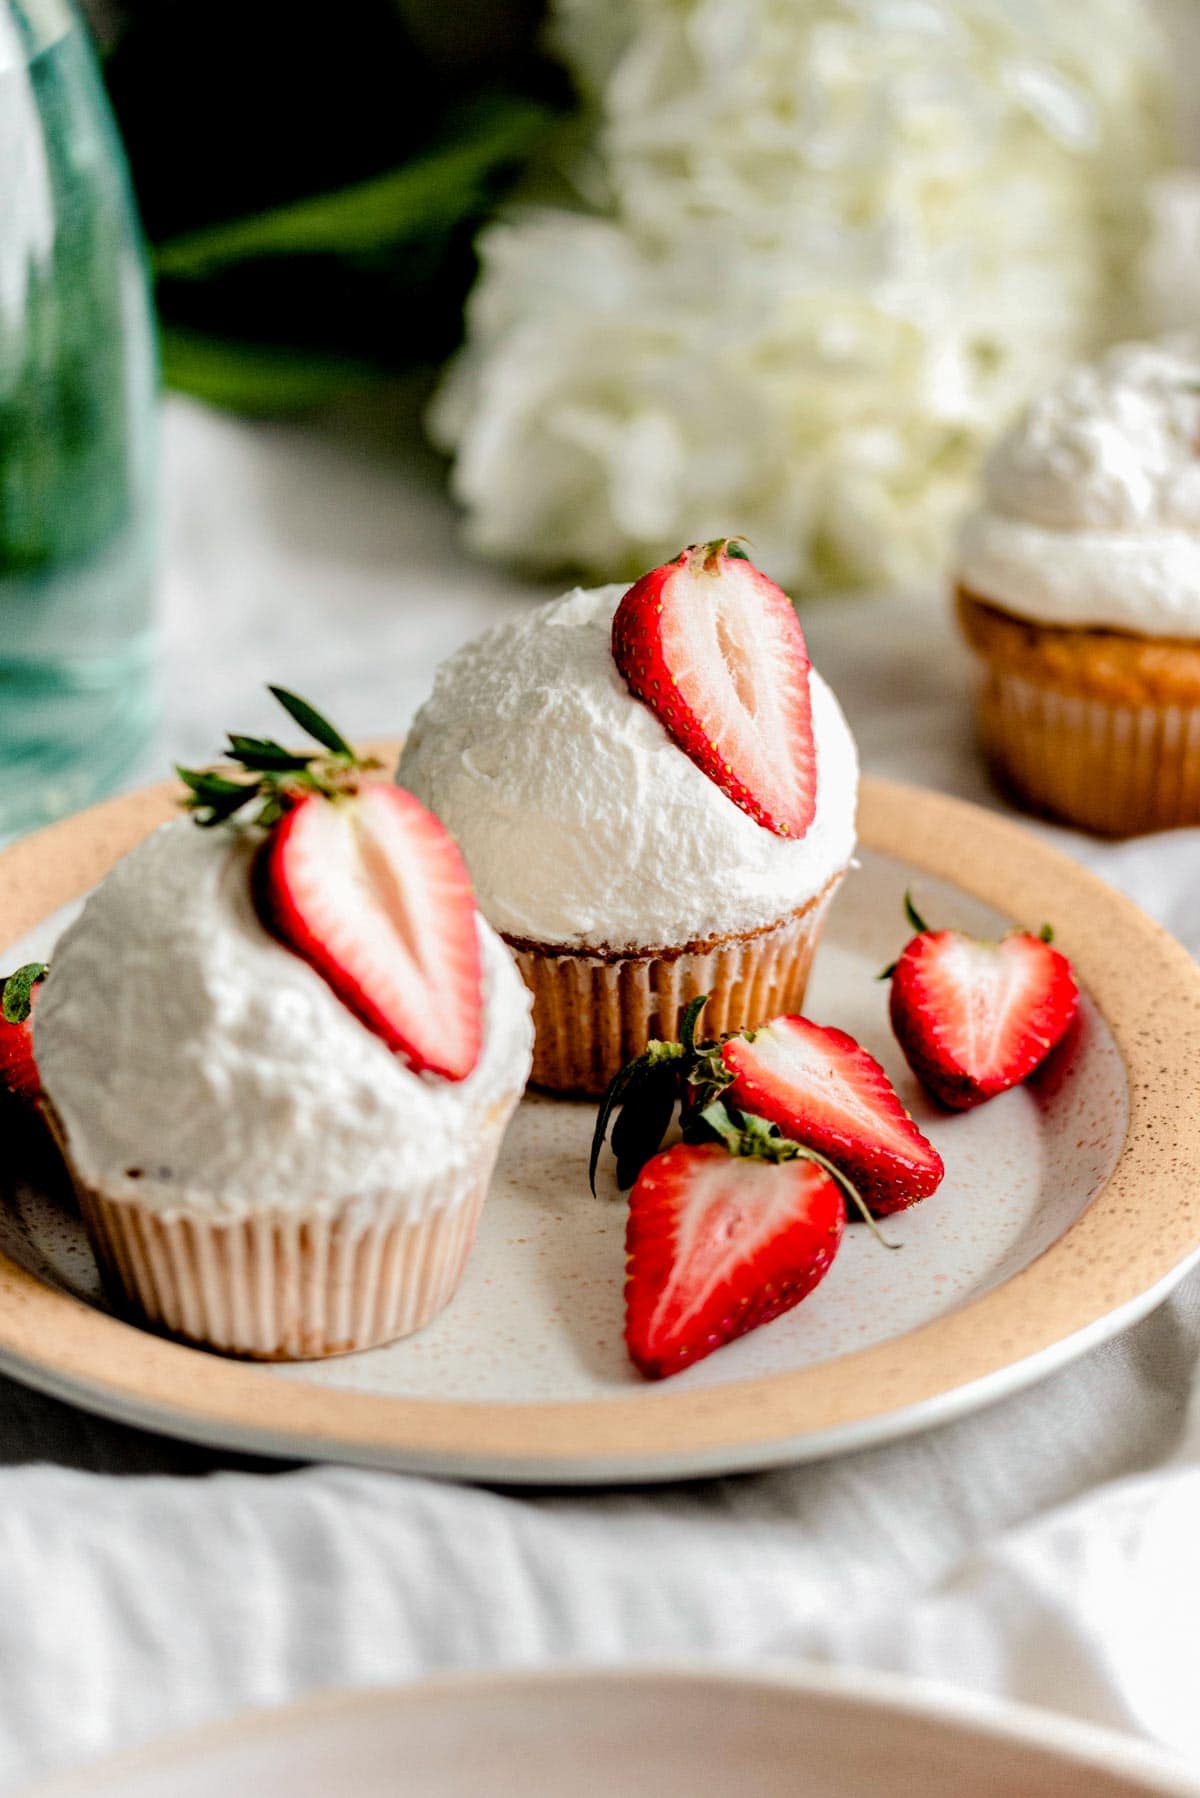 Two cupcakes on a plate with halved strawberries on a white linen table cloth.